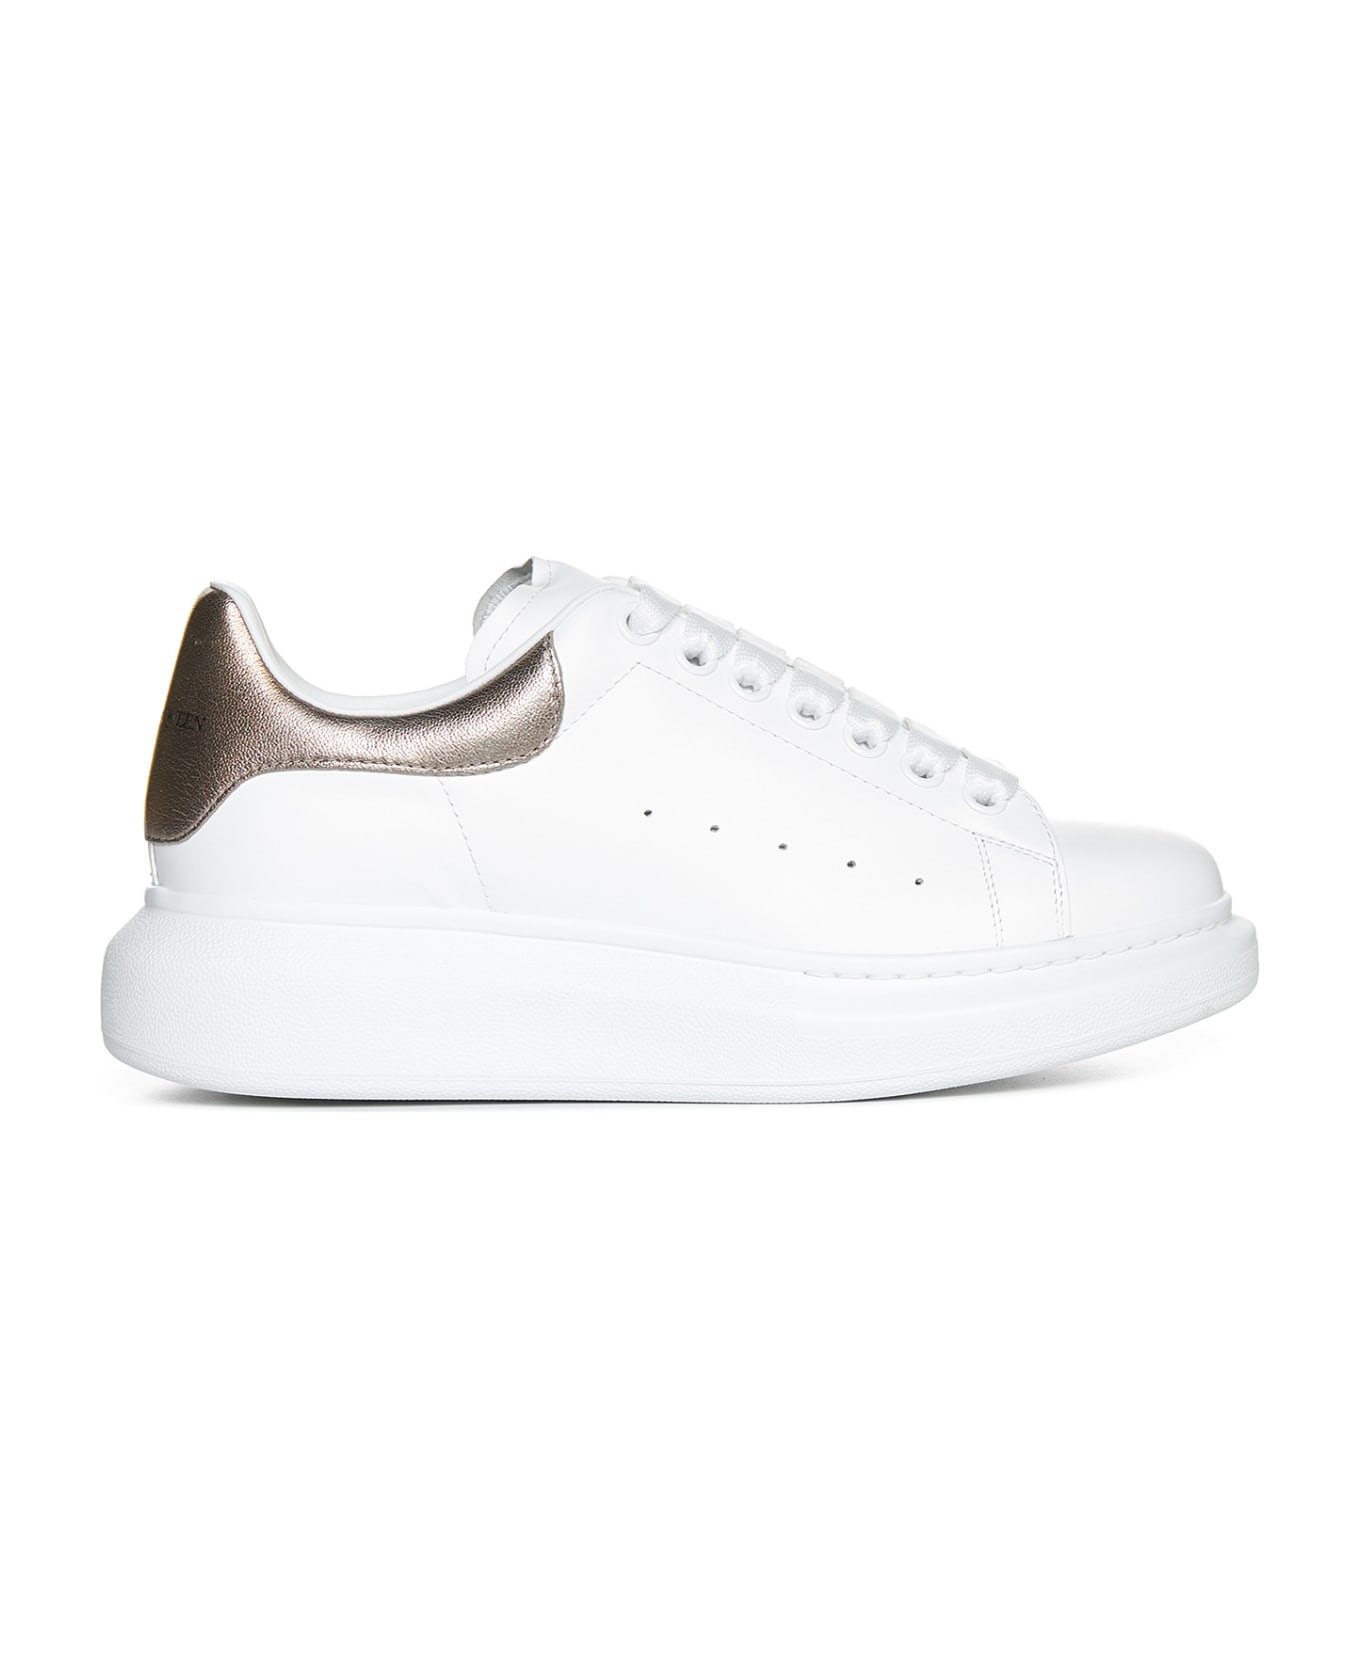 Alexander McQueen Sneakers - White rose gold 171